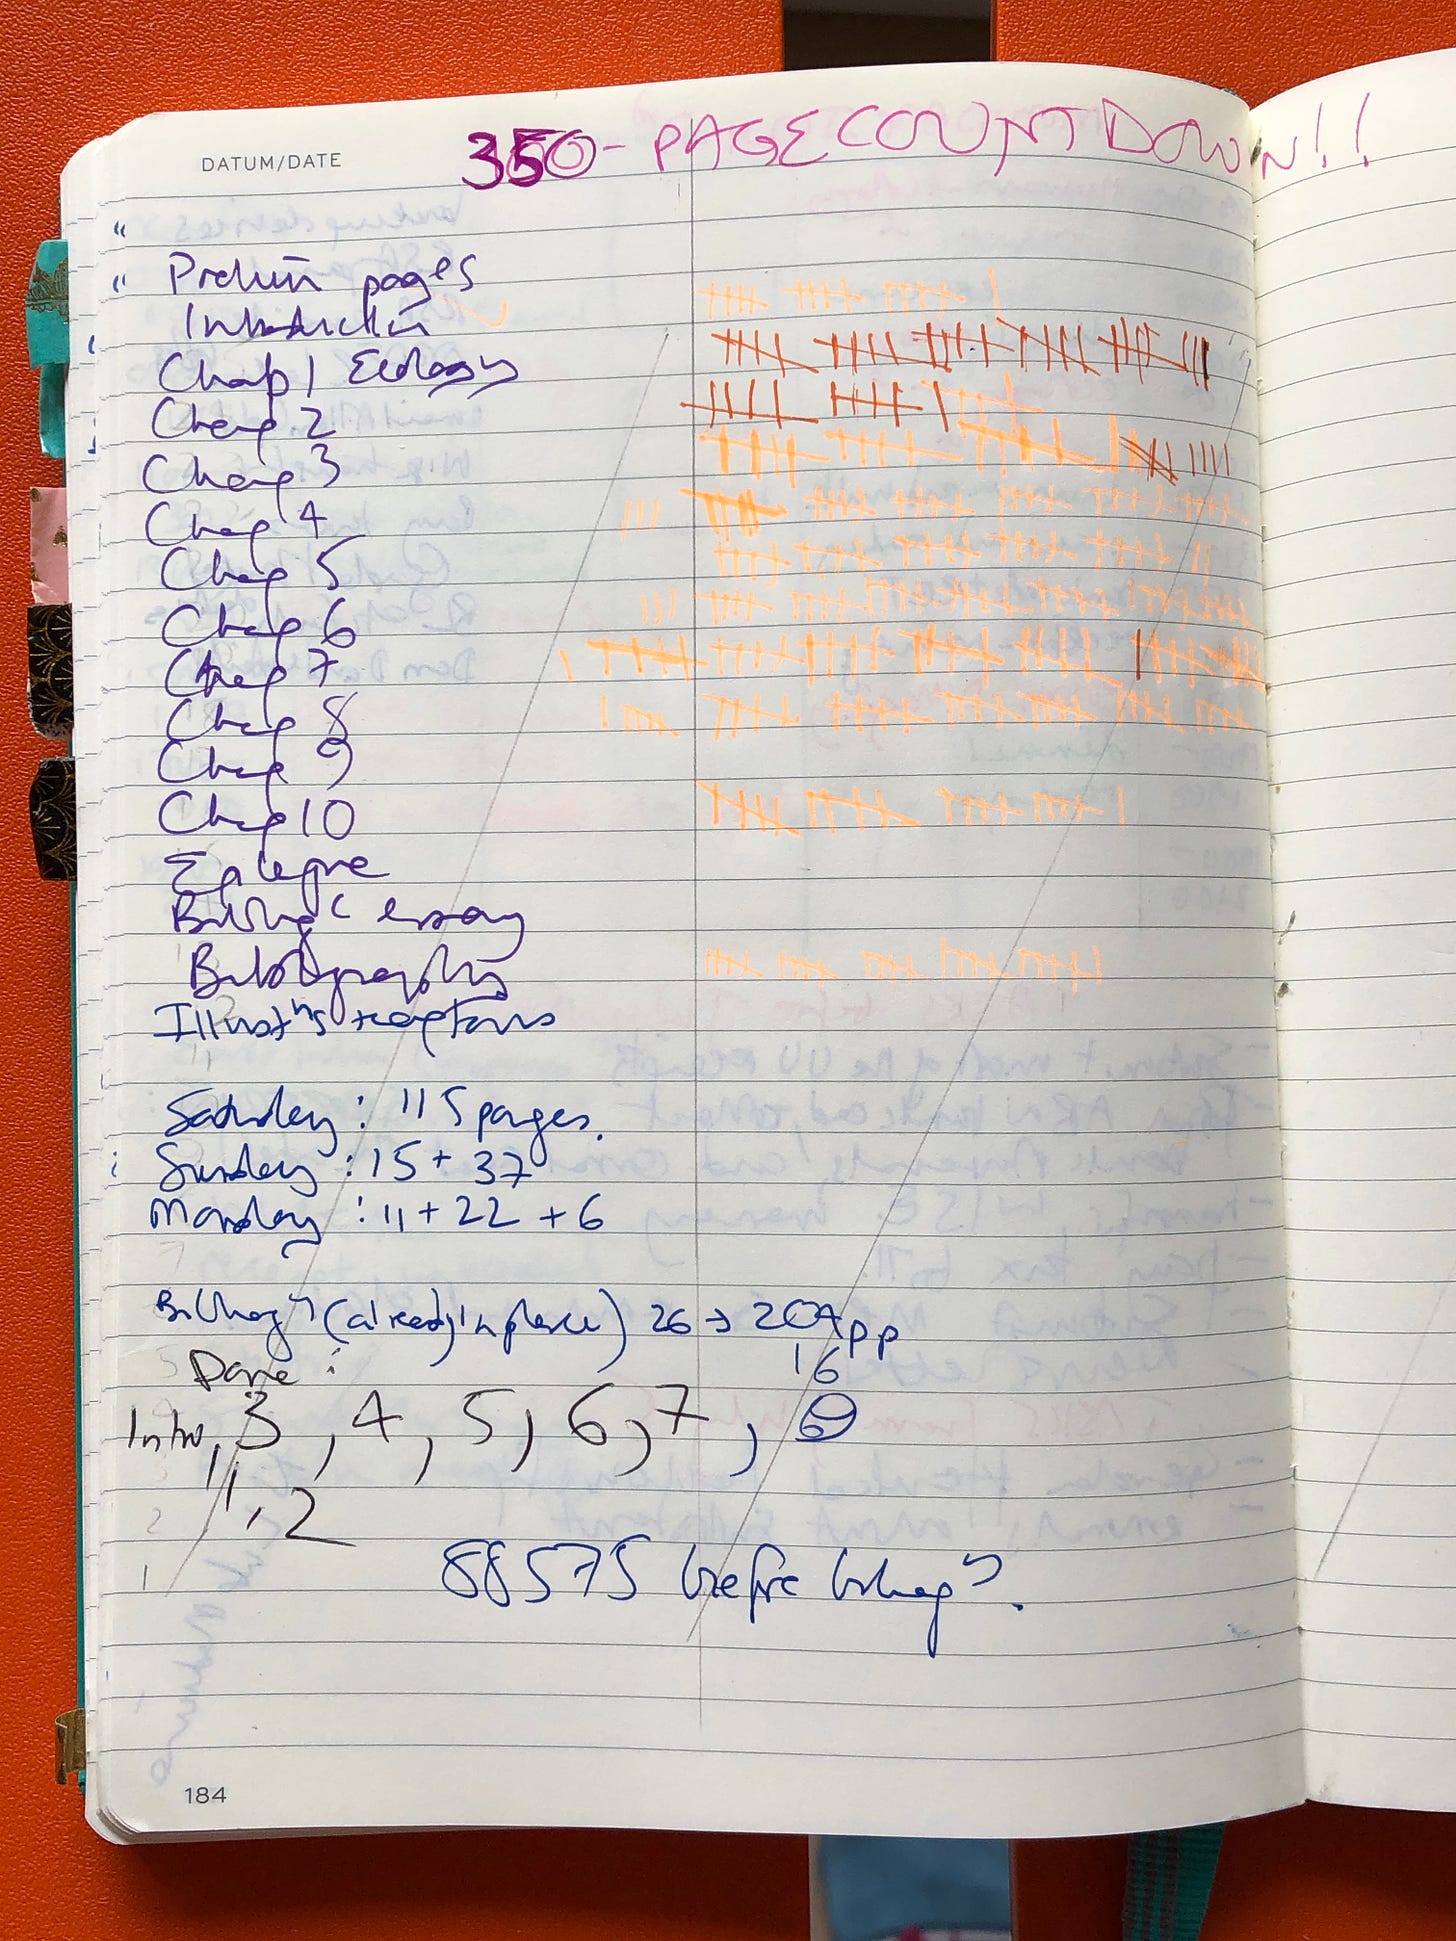 A messy scrawl of a page countdown, with chapter names/numbers down the left-hand side and pages completed checked off along the horizontal lines. Miscellaneous mysterious notes run along the bottom of the page.